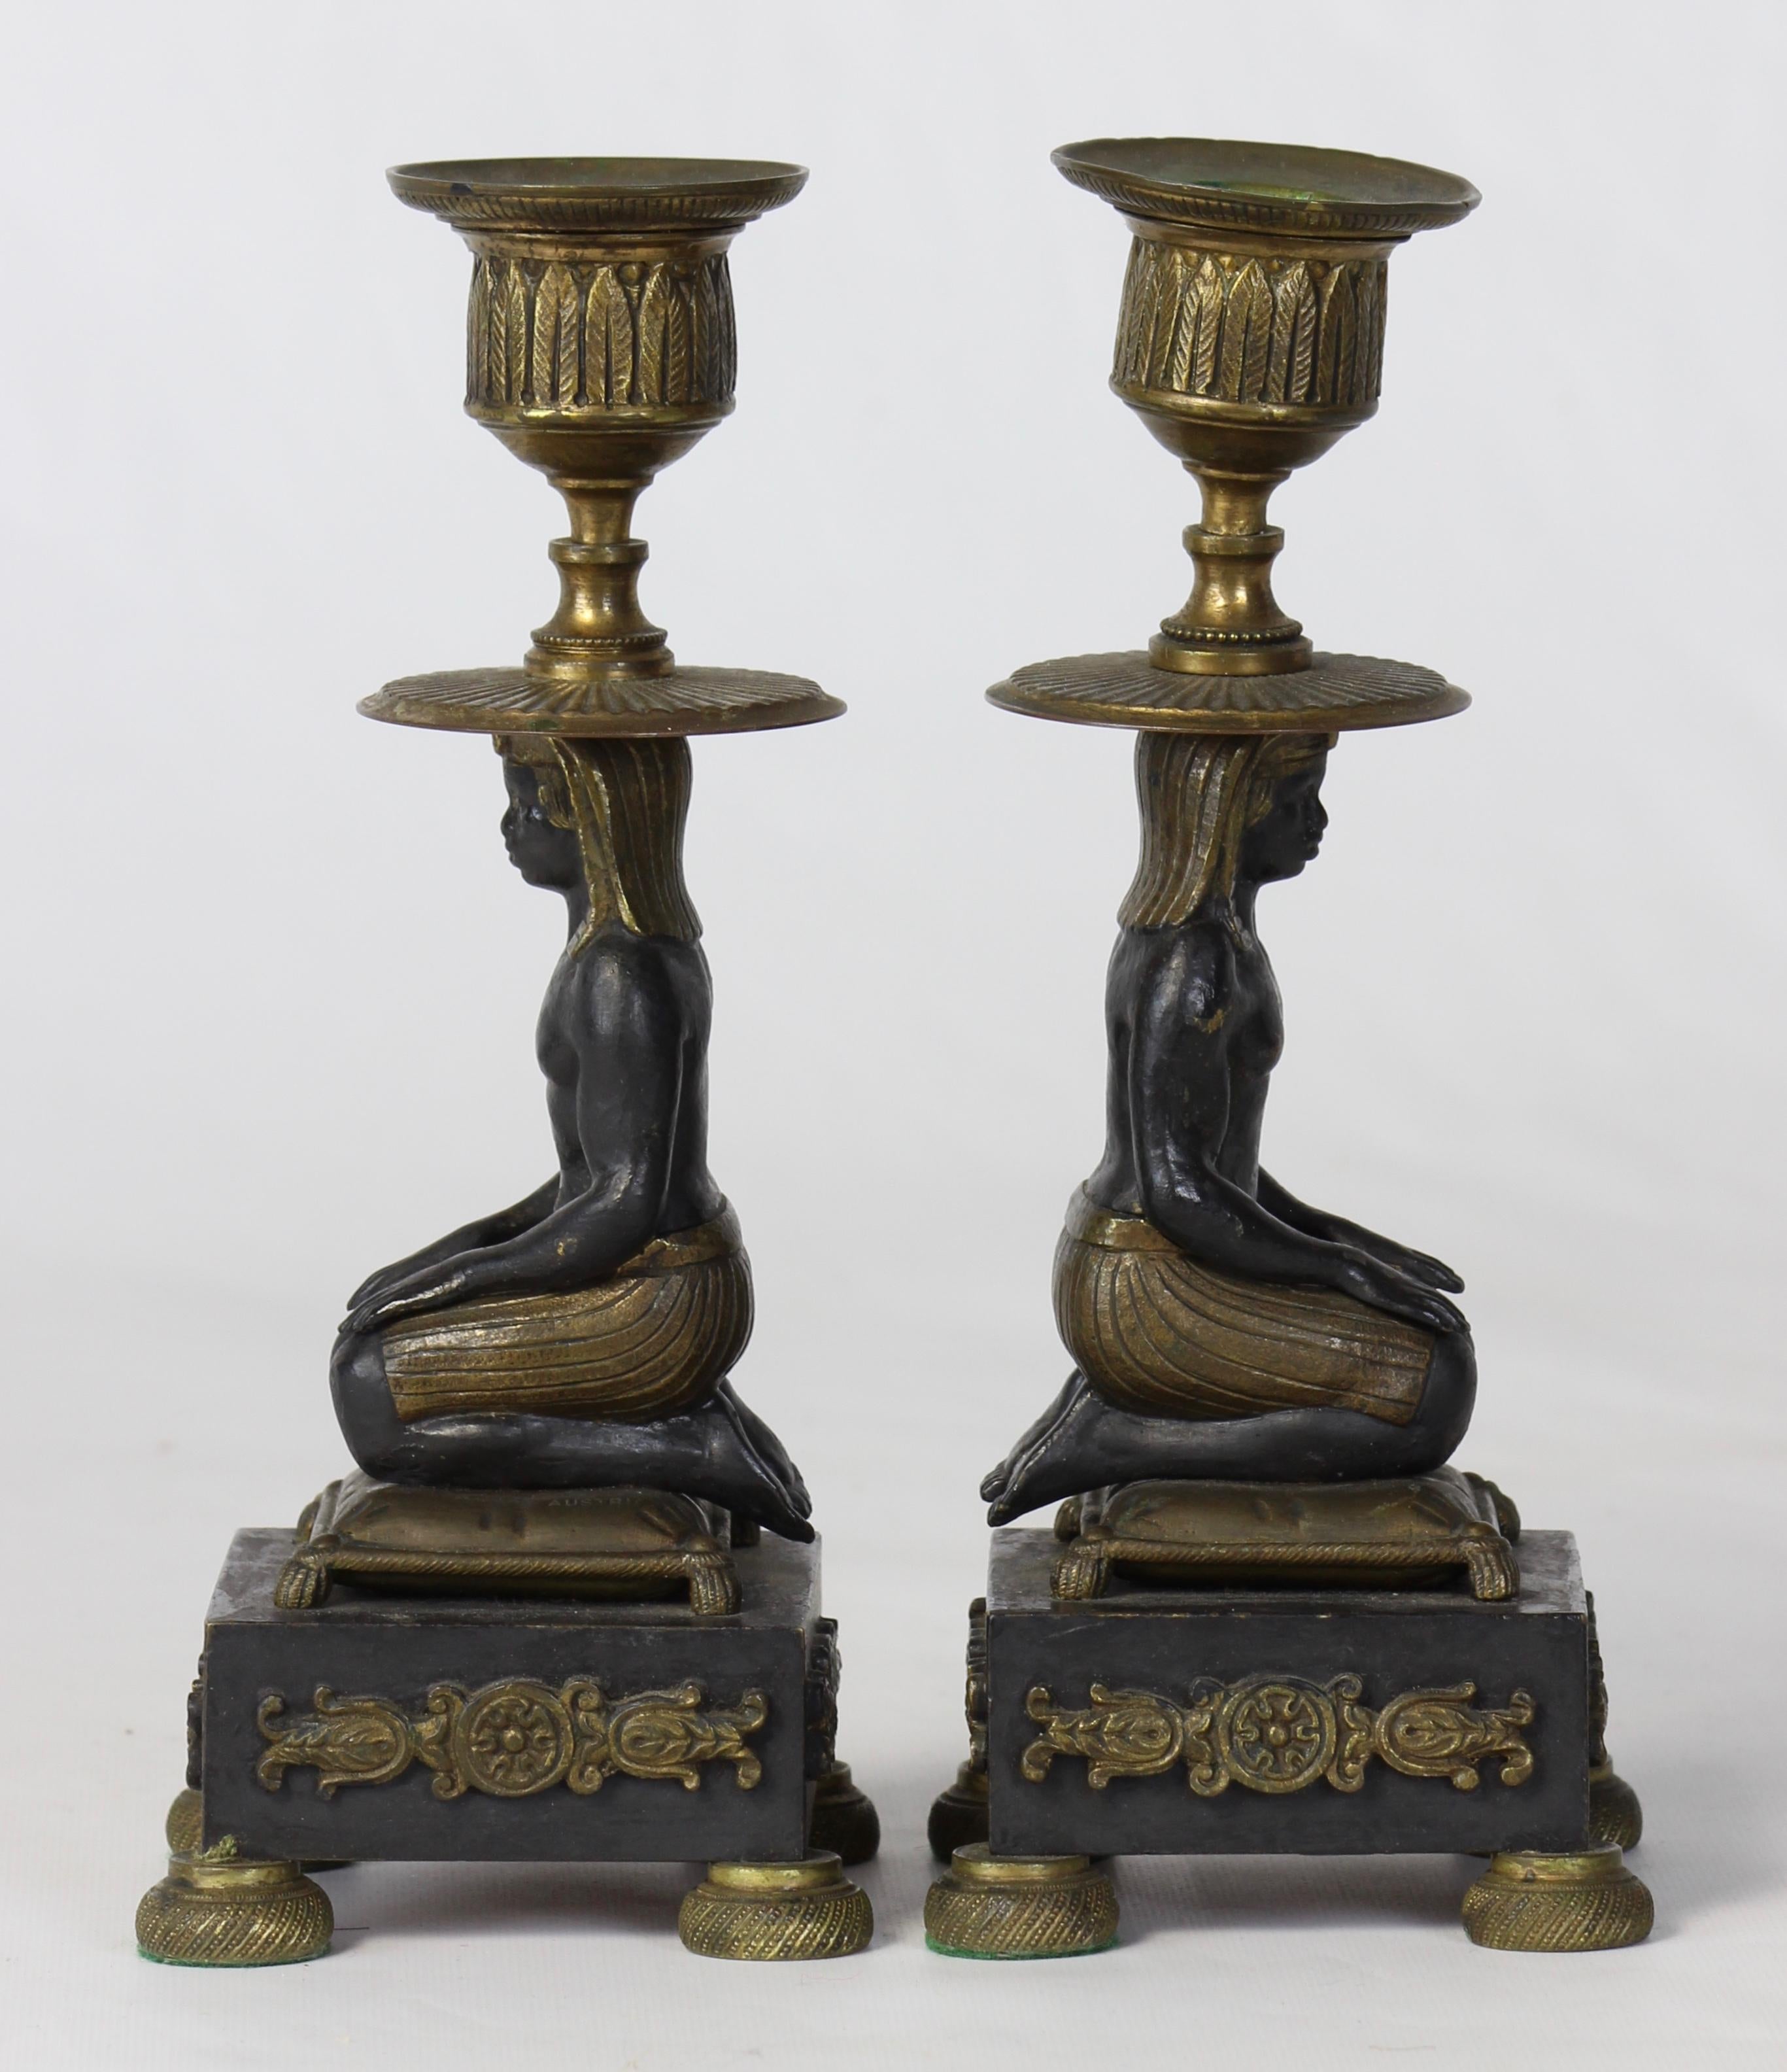 Bronze Pair of Early 19th Century Egyptian Revival Candlesticks